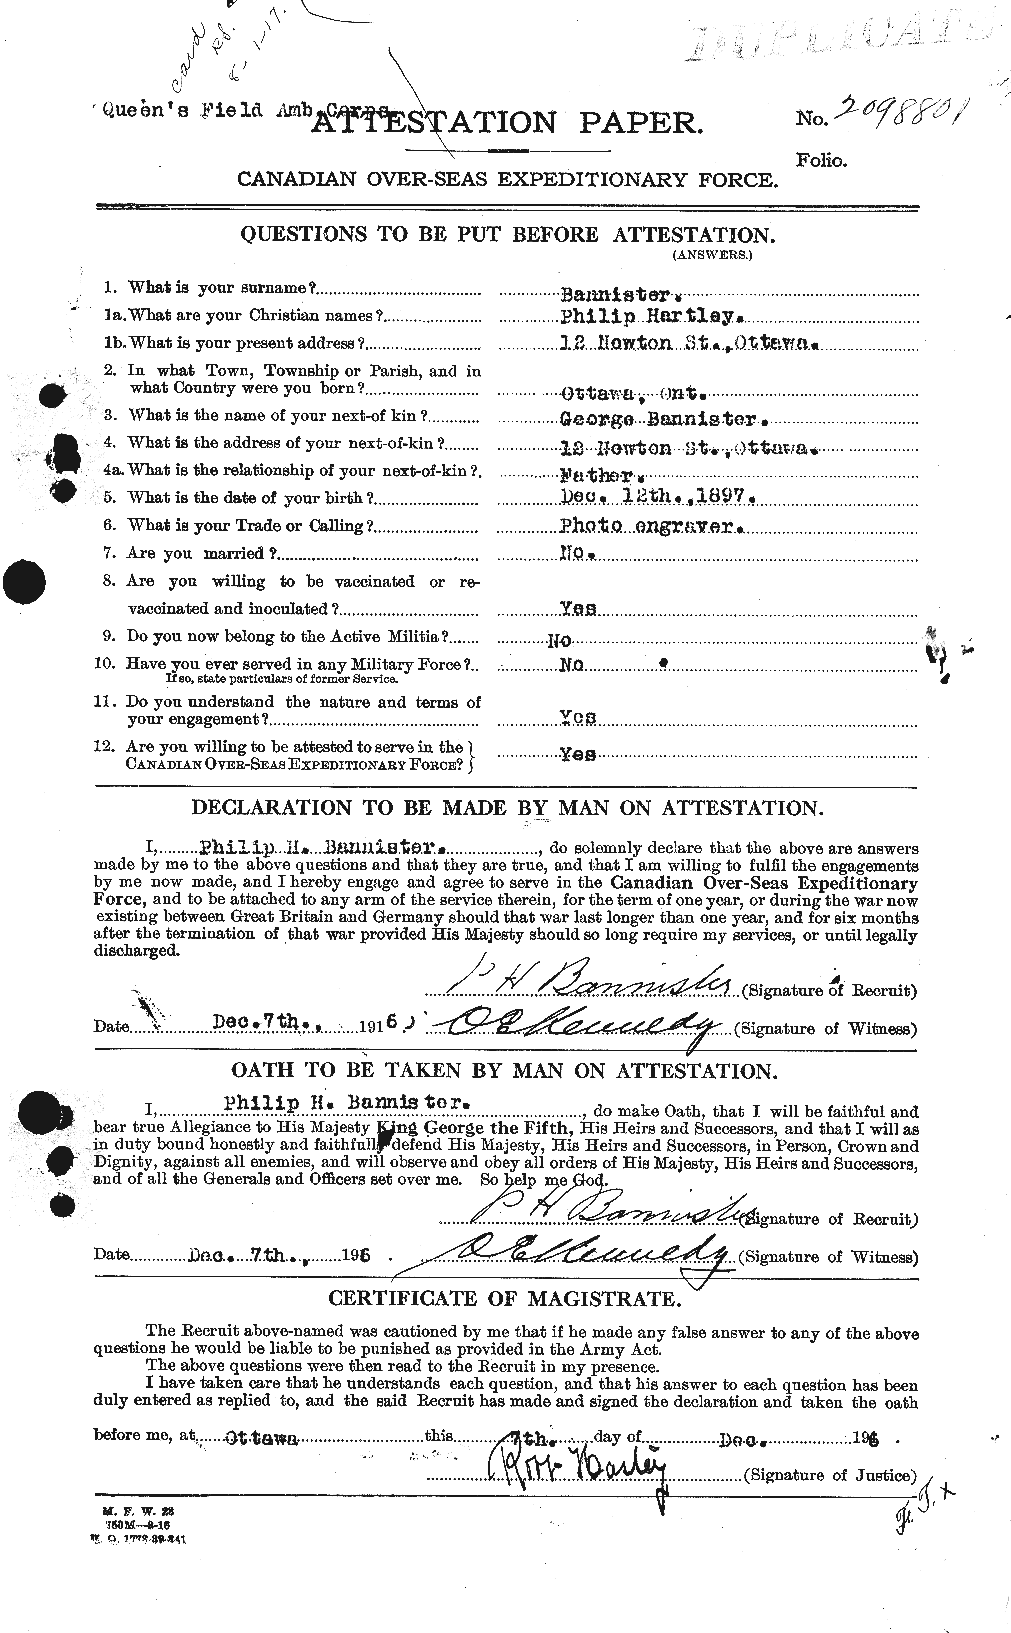 Personnel Records of the First World War - CEF 224772a